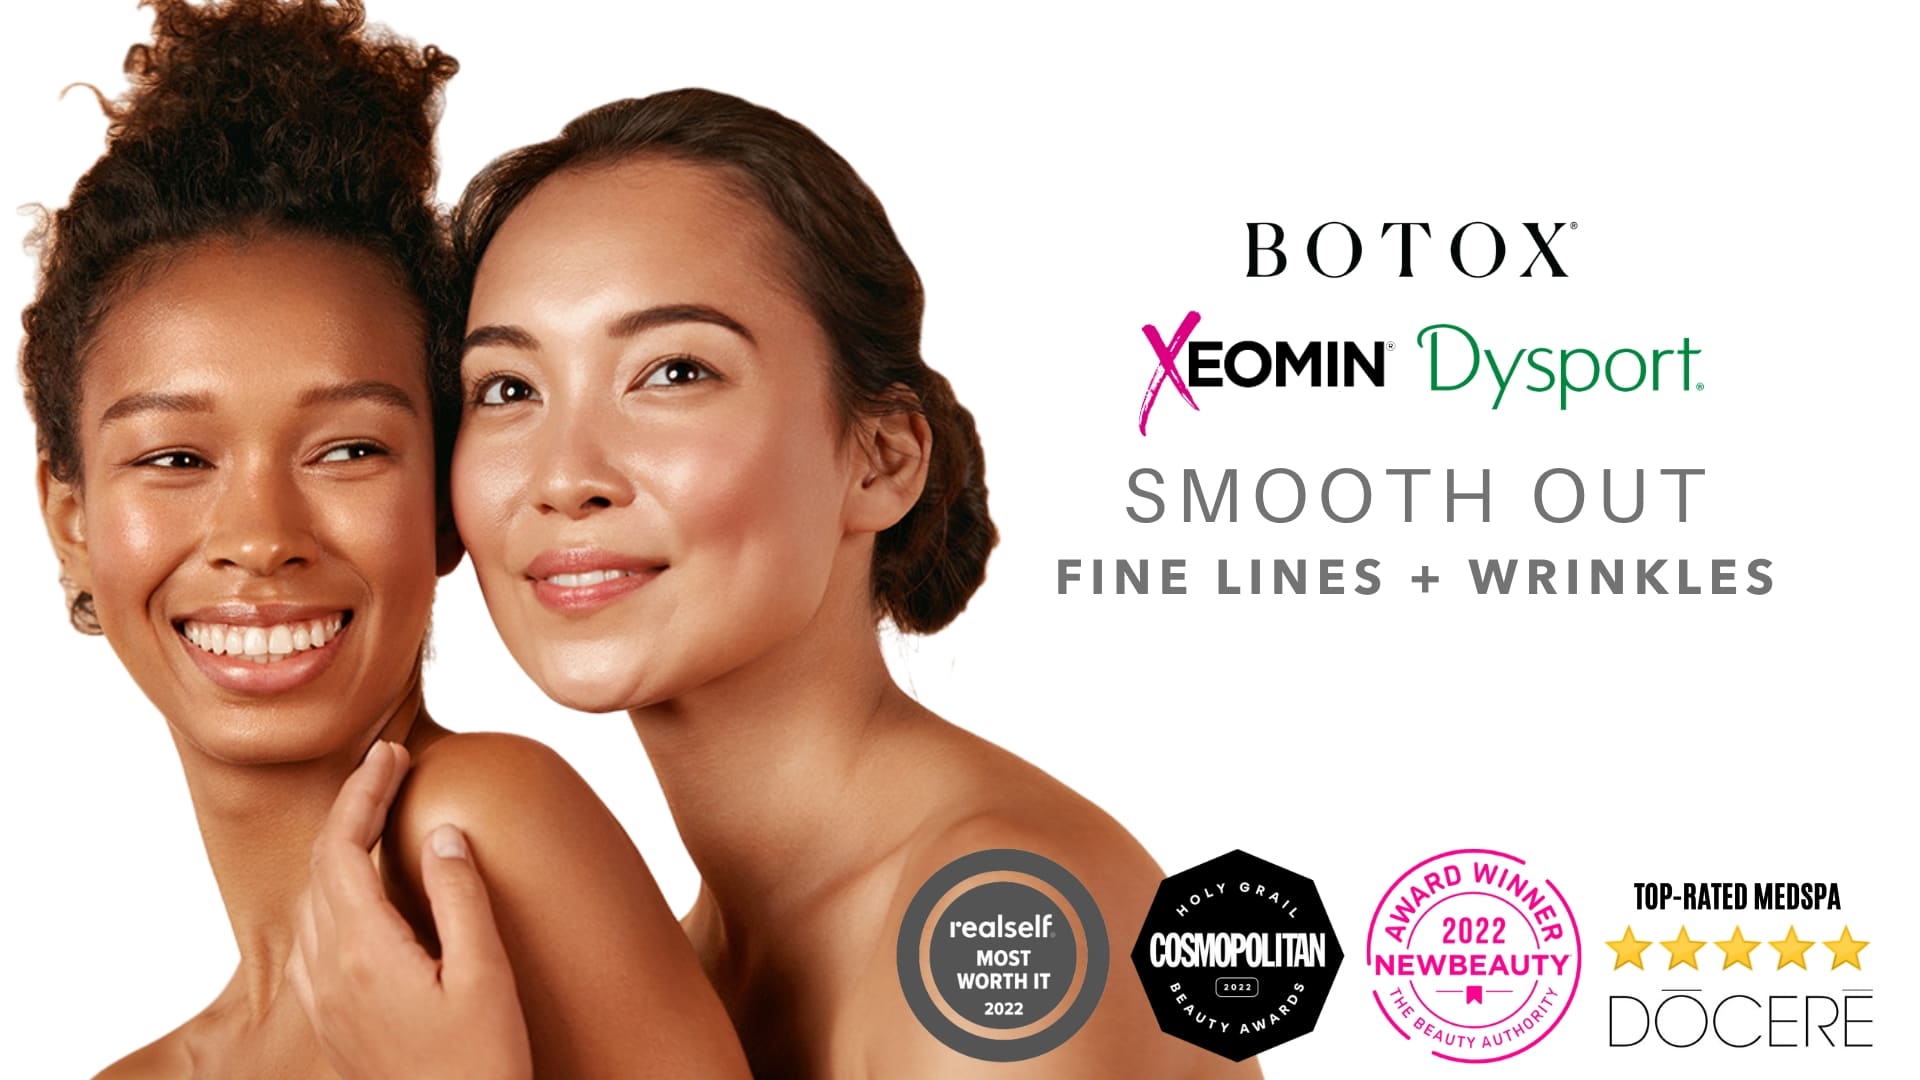 Women smiling and looking youthful as a result of their cosmetic injectables like botox, dysport, xeomin.